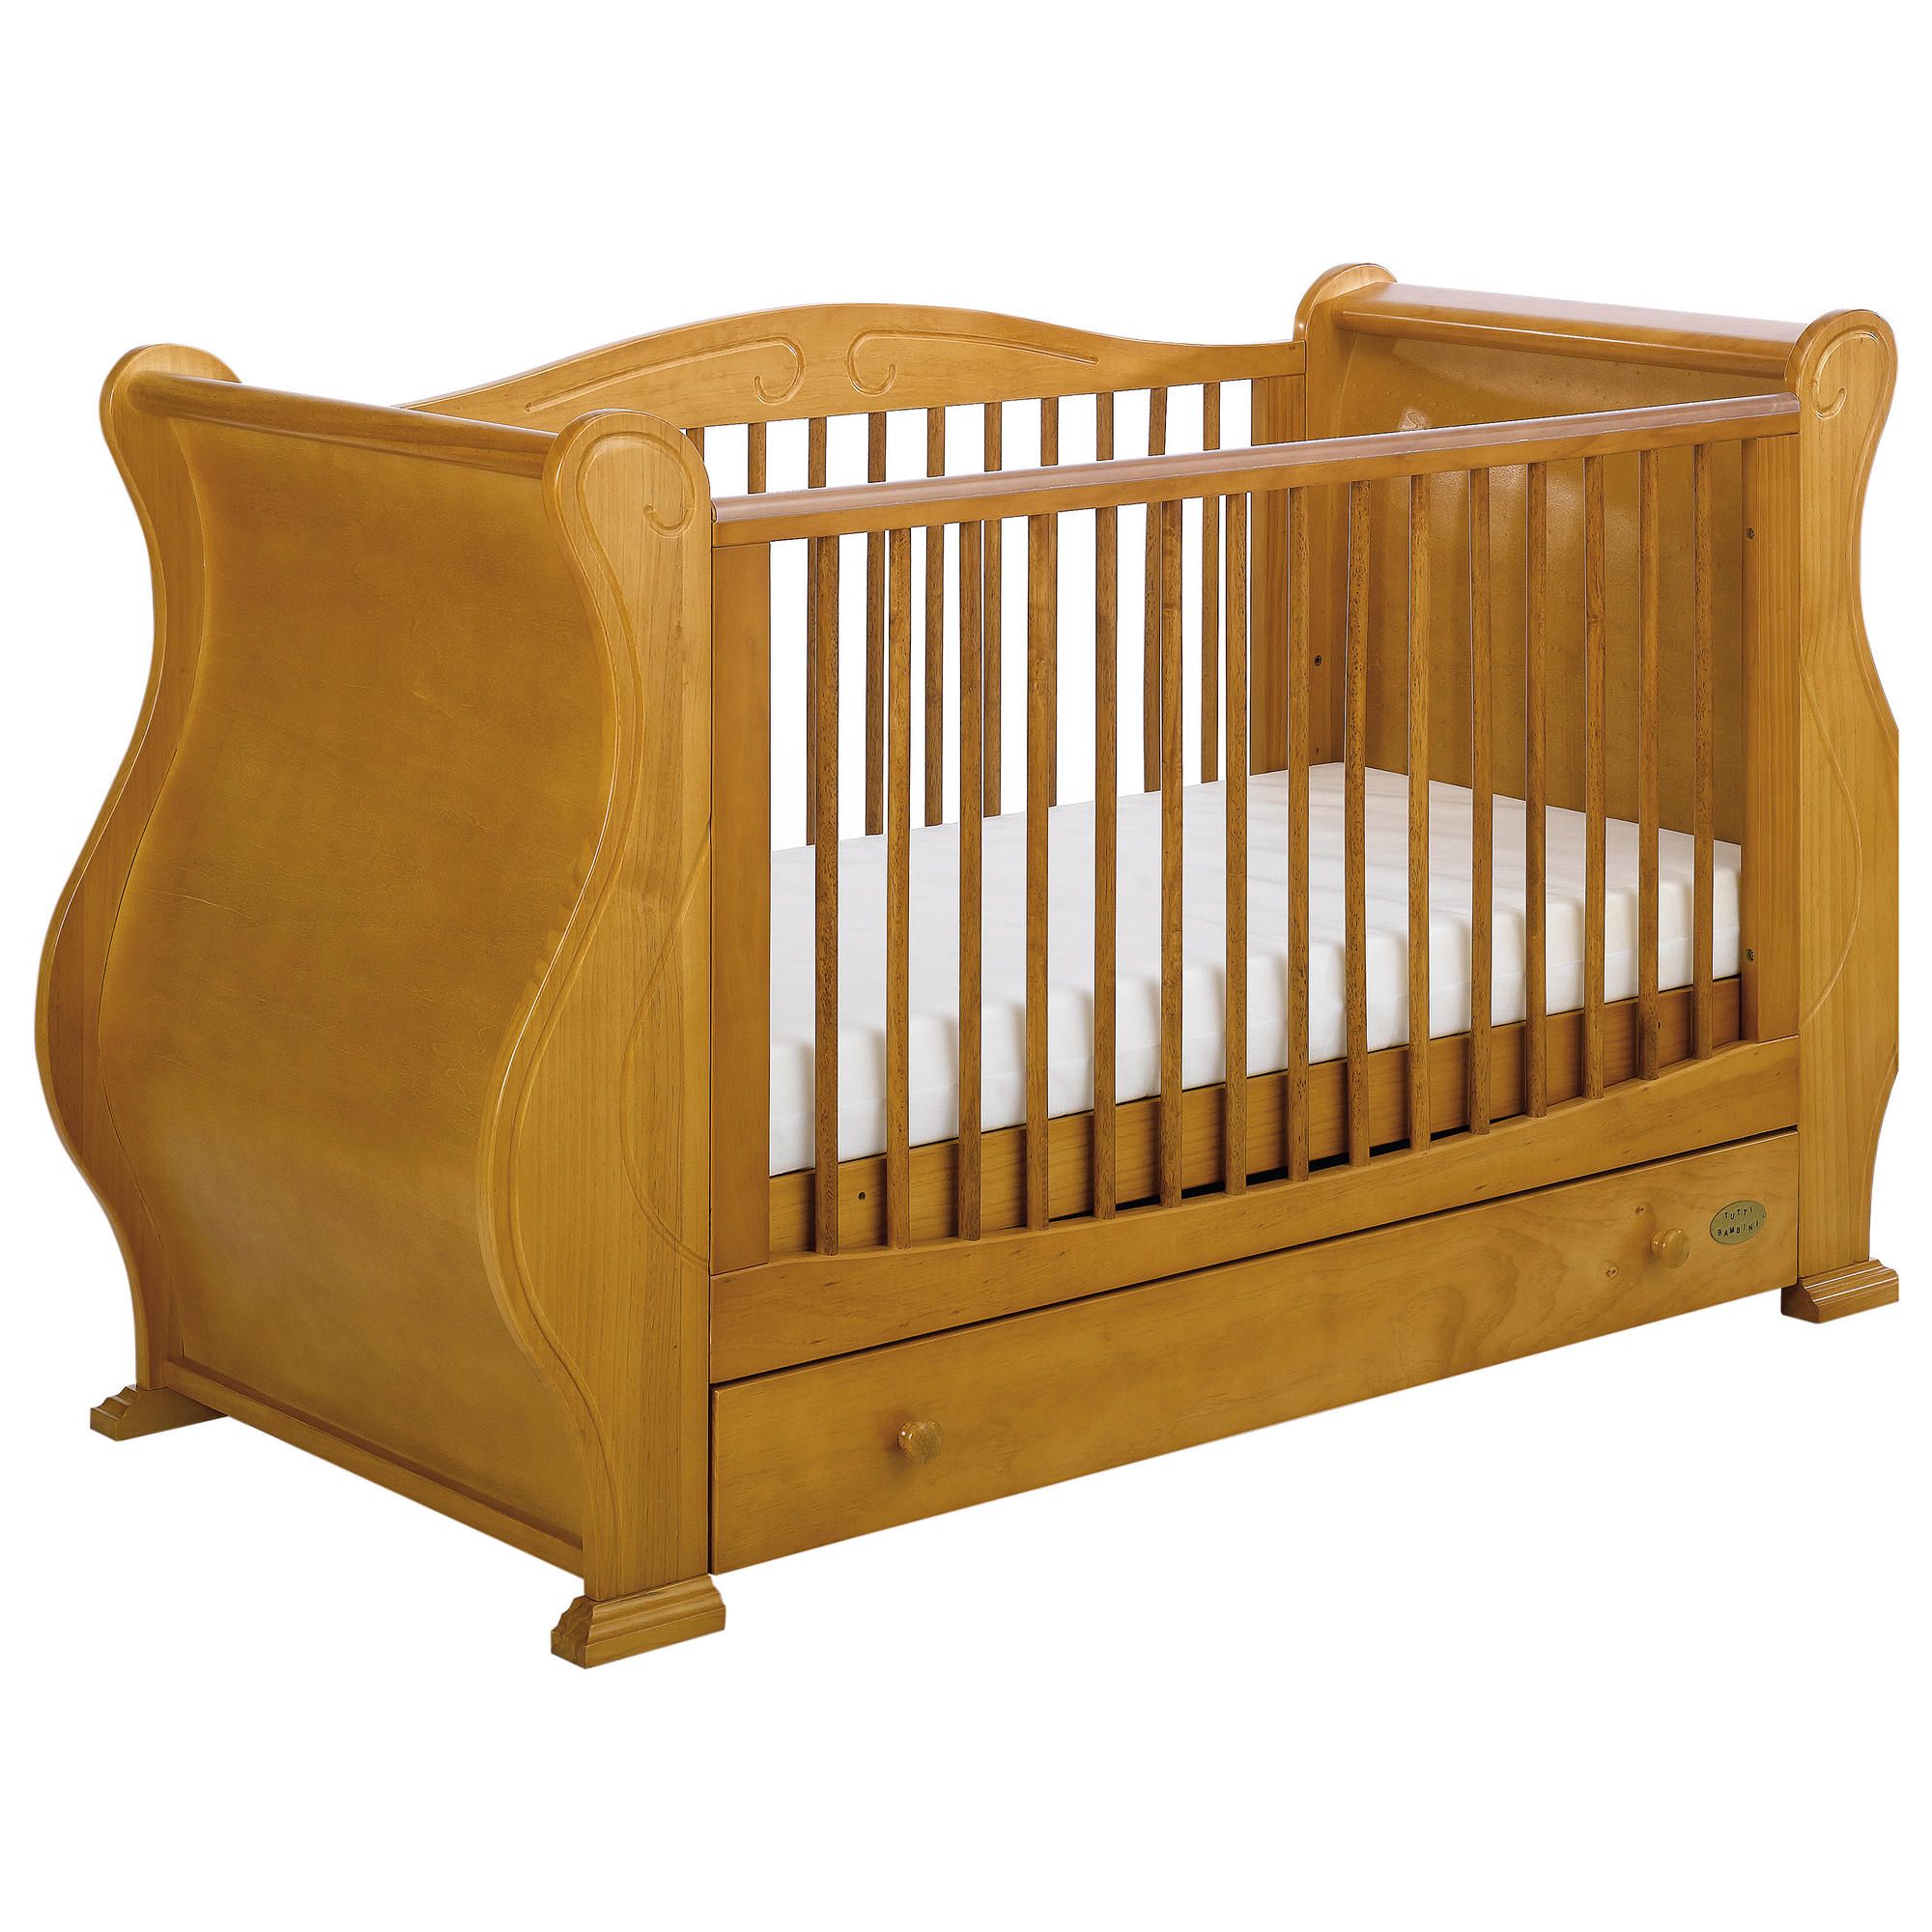 Tutti Bambini Louis Fix Side Sleigh Marie Cot Bed, Natural at Tesco Direct